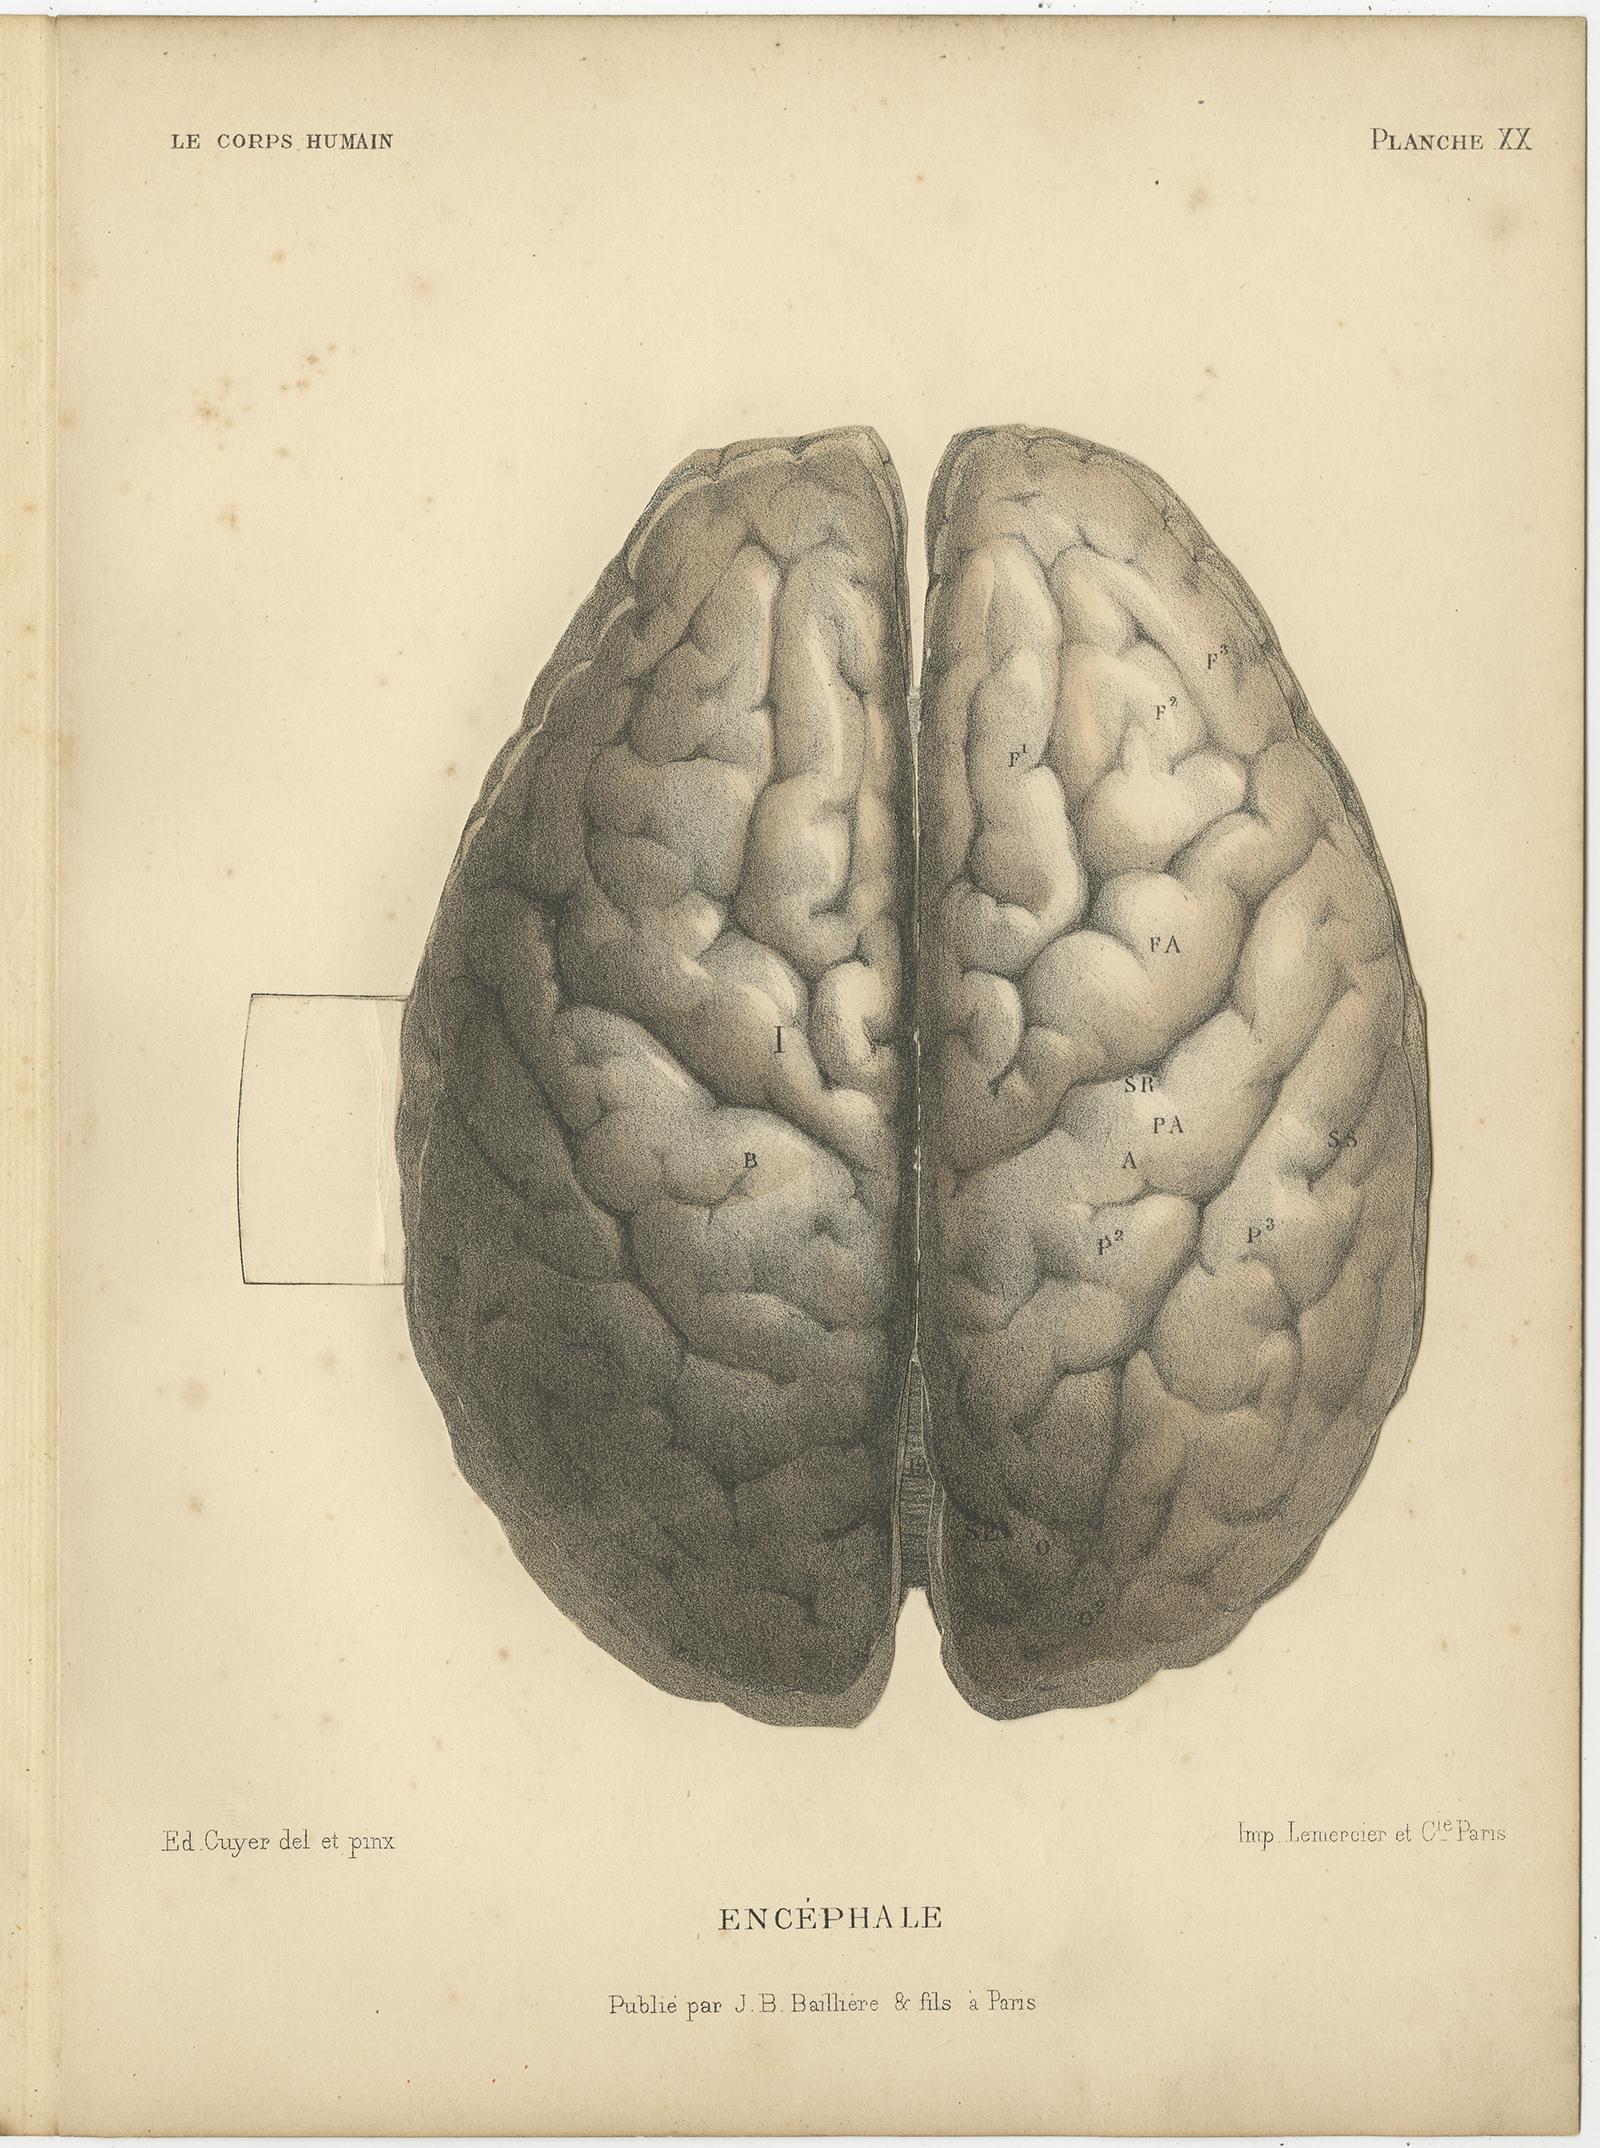 Set of two antique anatomy prints titled Encéphale' and 'L'Encéphale Face Latérale - Cervelet'. Colored lithographs of human brains with superimposed flaps. These prints originate from 'Le Corps Humain' by G.A. Kuhff. Illustrated by Edouard Cuyer.